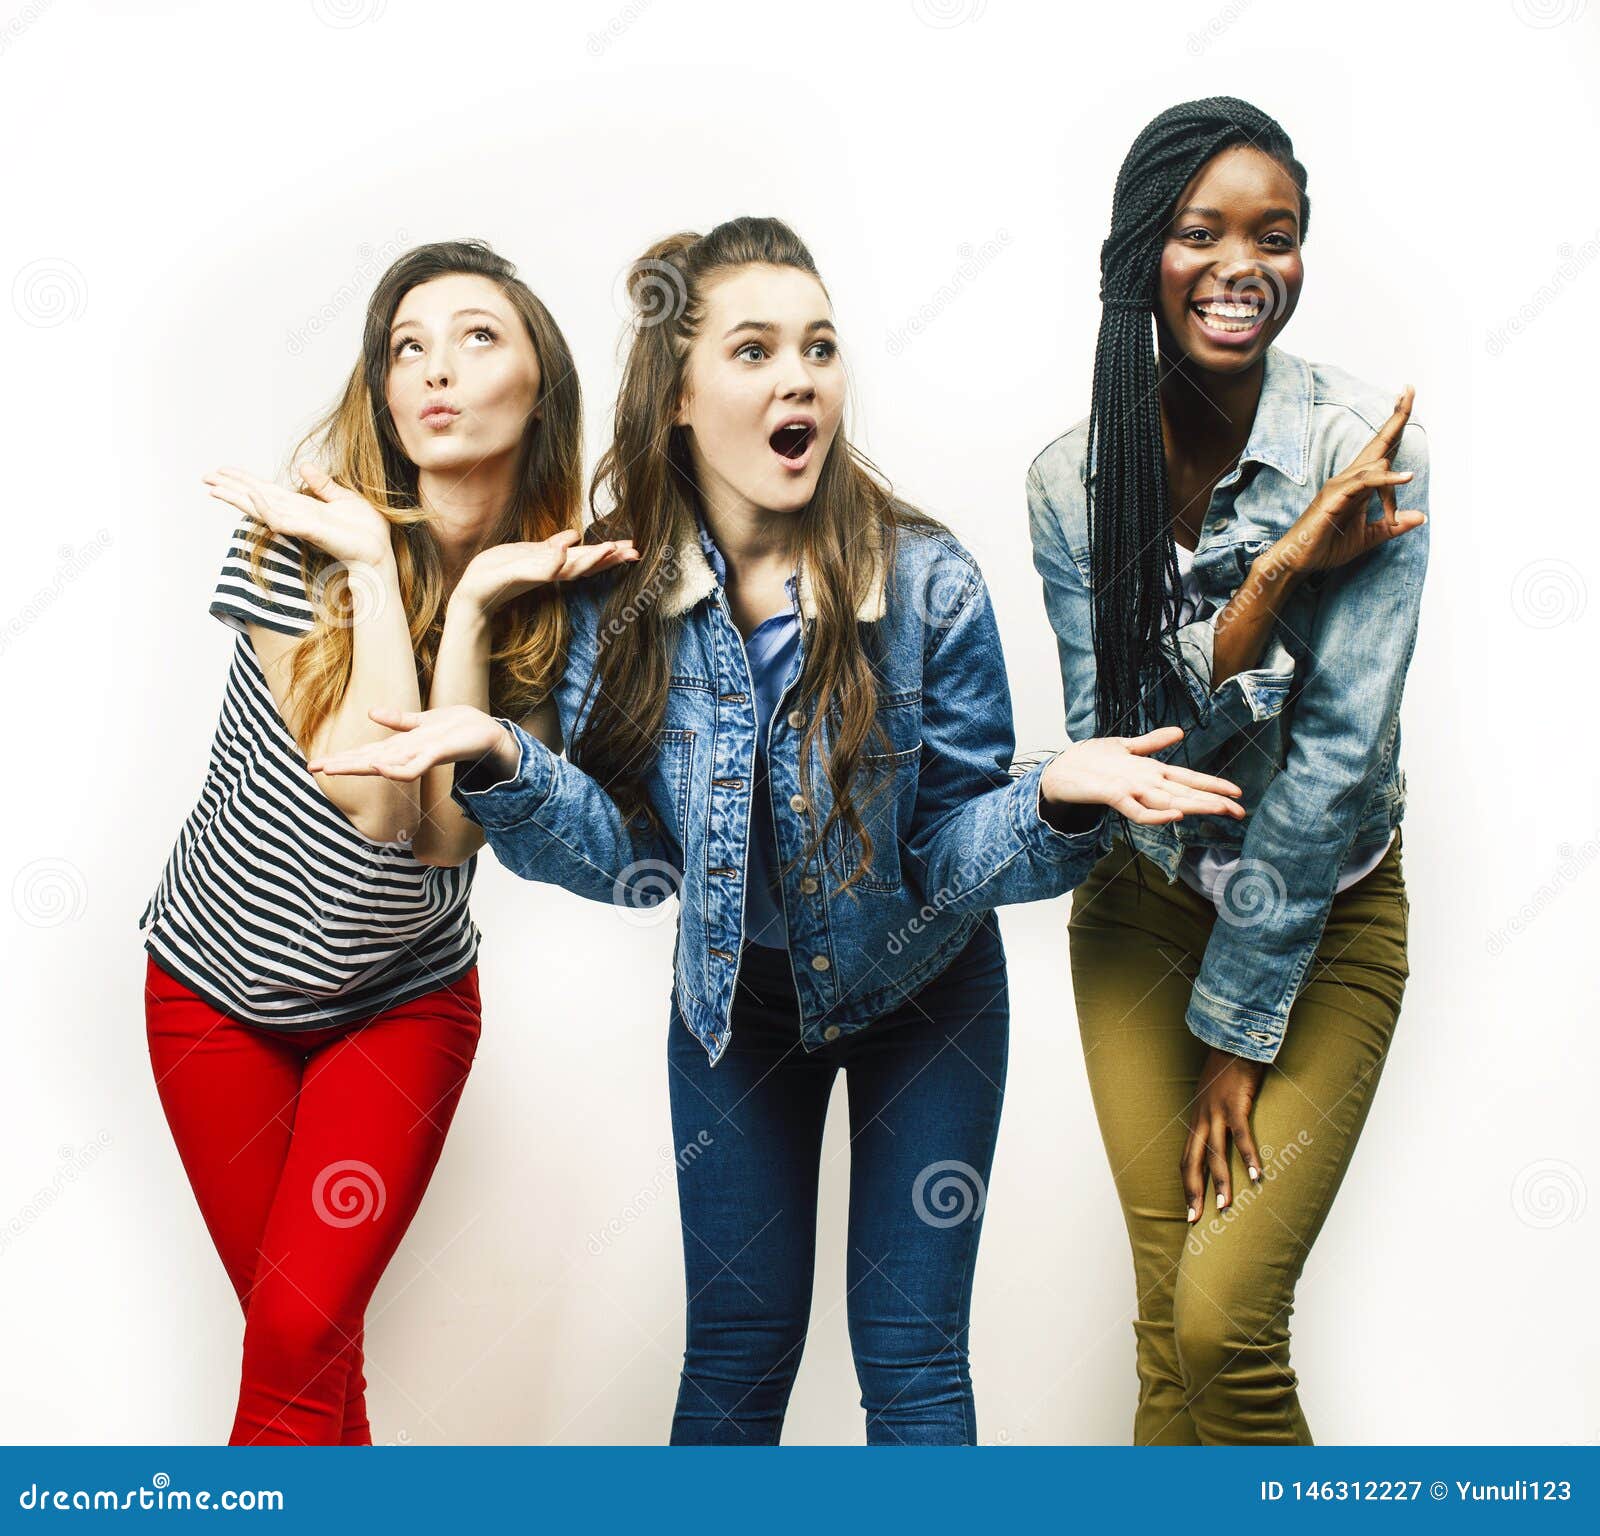 Three best friends group photo poses // friends group photo poses - YouTube